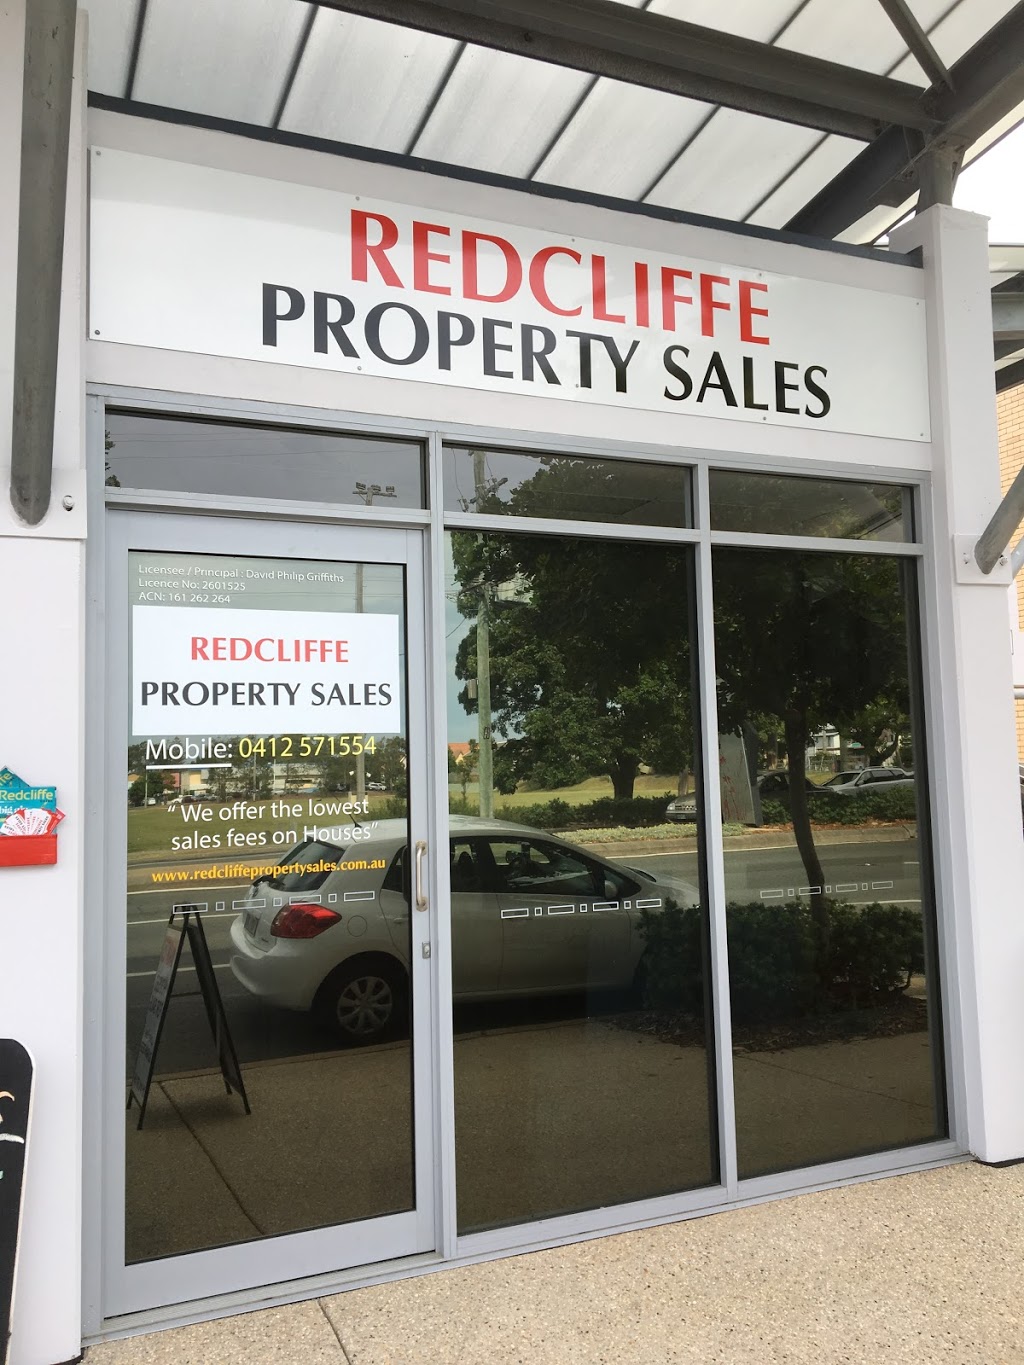 REDCLIFFE PROPERTY SALES | real estate agency | 249 Oxley Avenue Margate, Redcliffe QLD 4019, Australia | 0412571554 OR +61 412 571 554